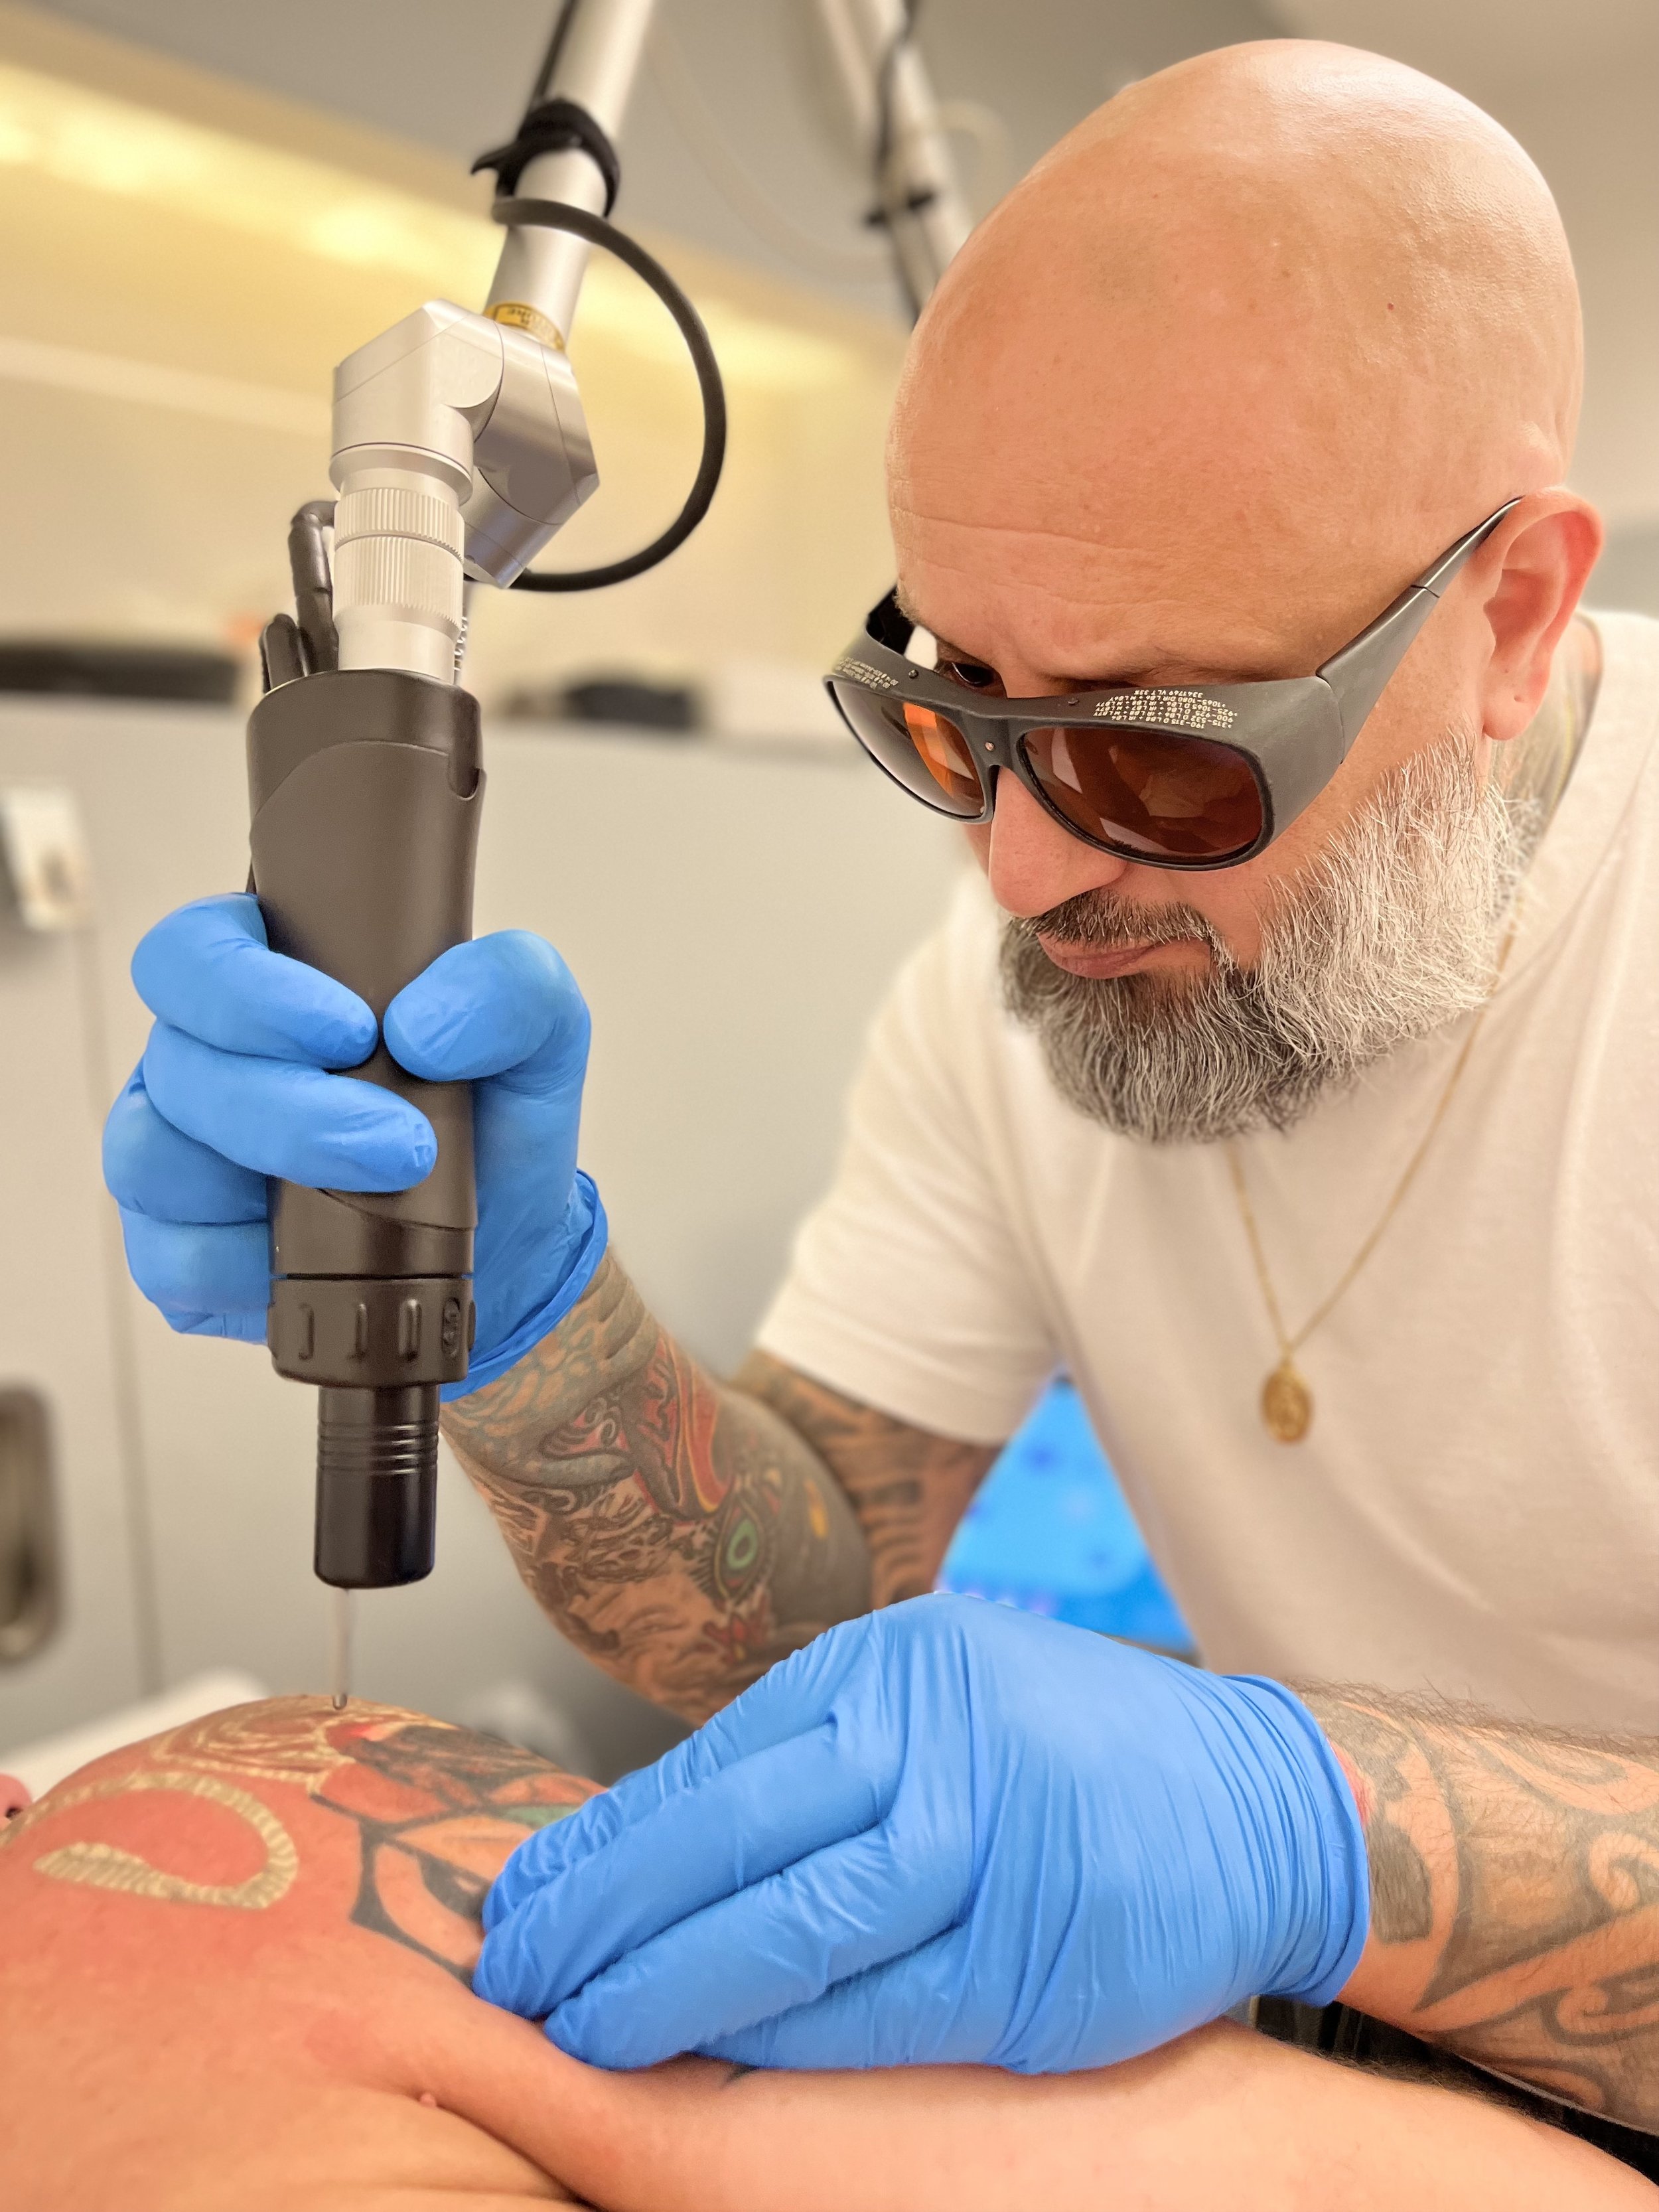 UK Tattoo courses for beginners - VeAn Tattoo